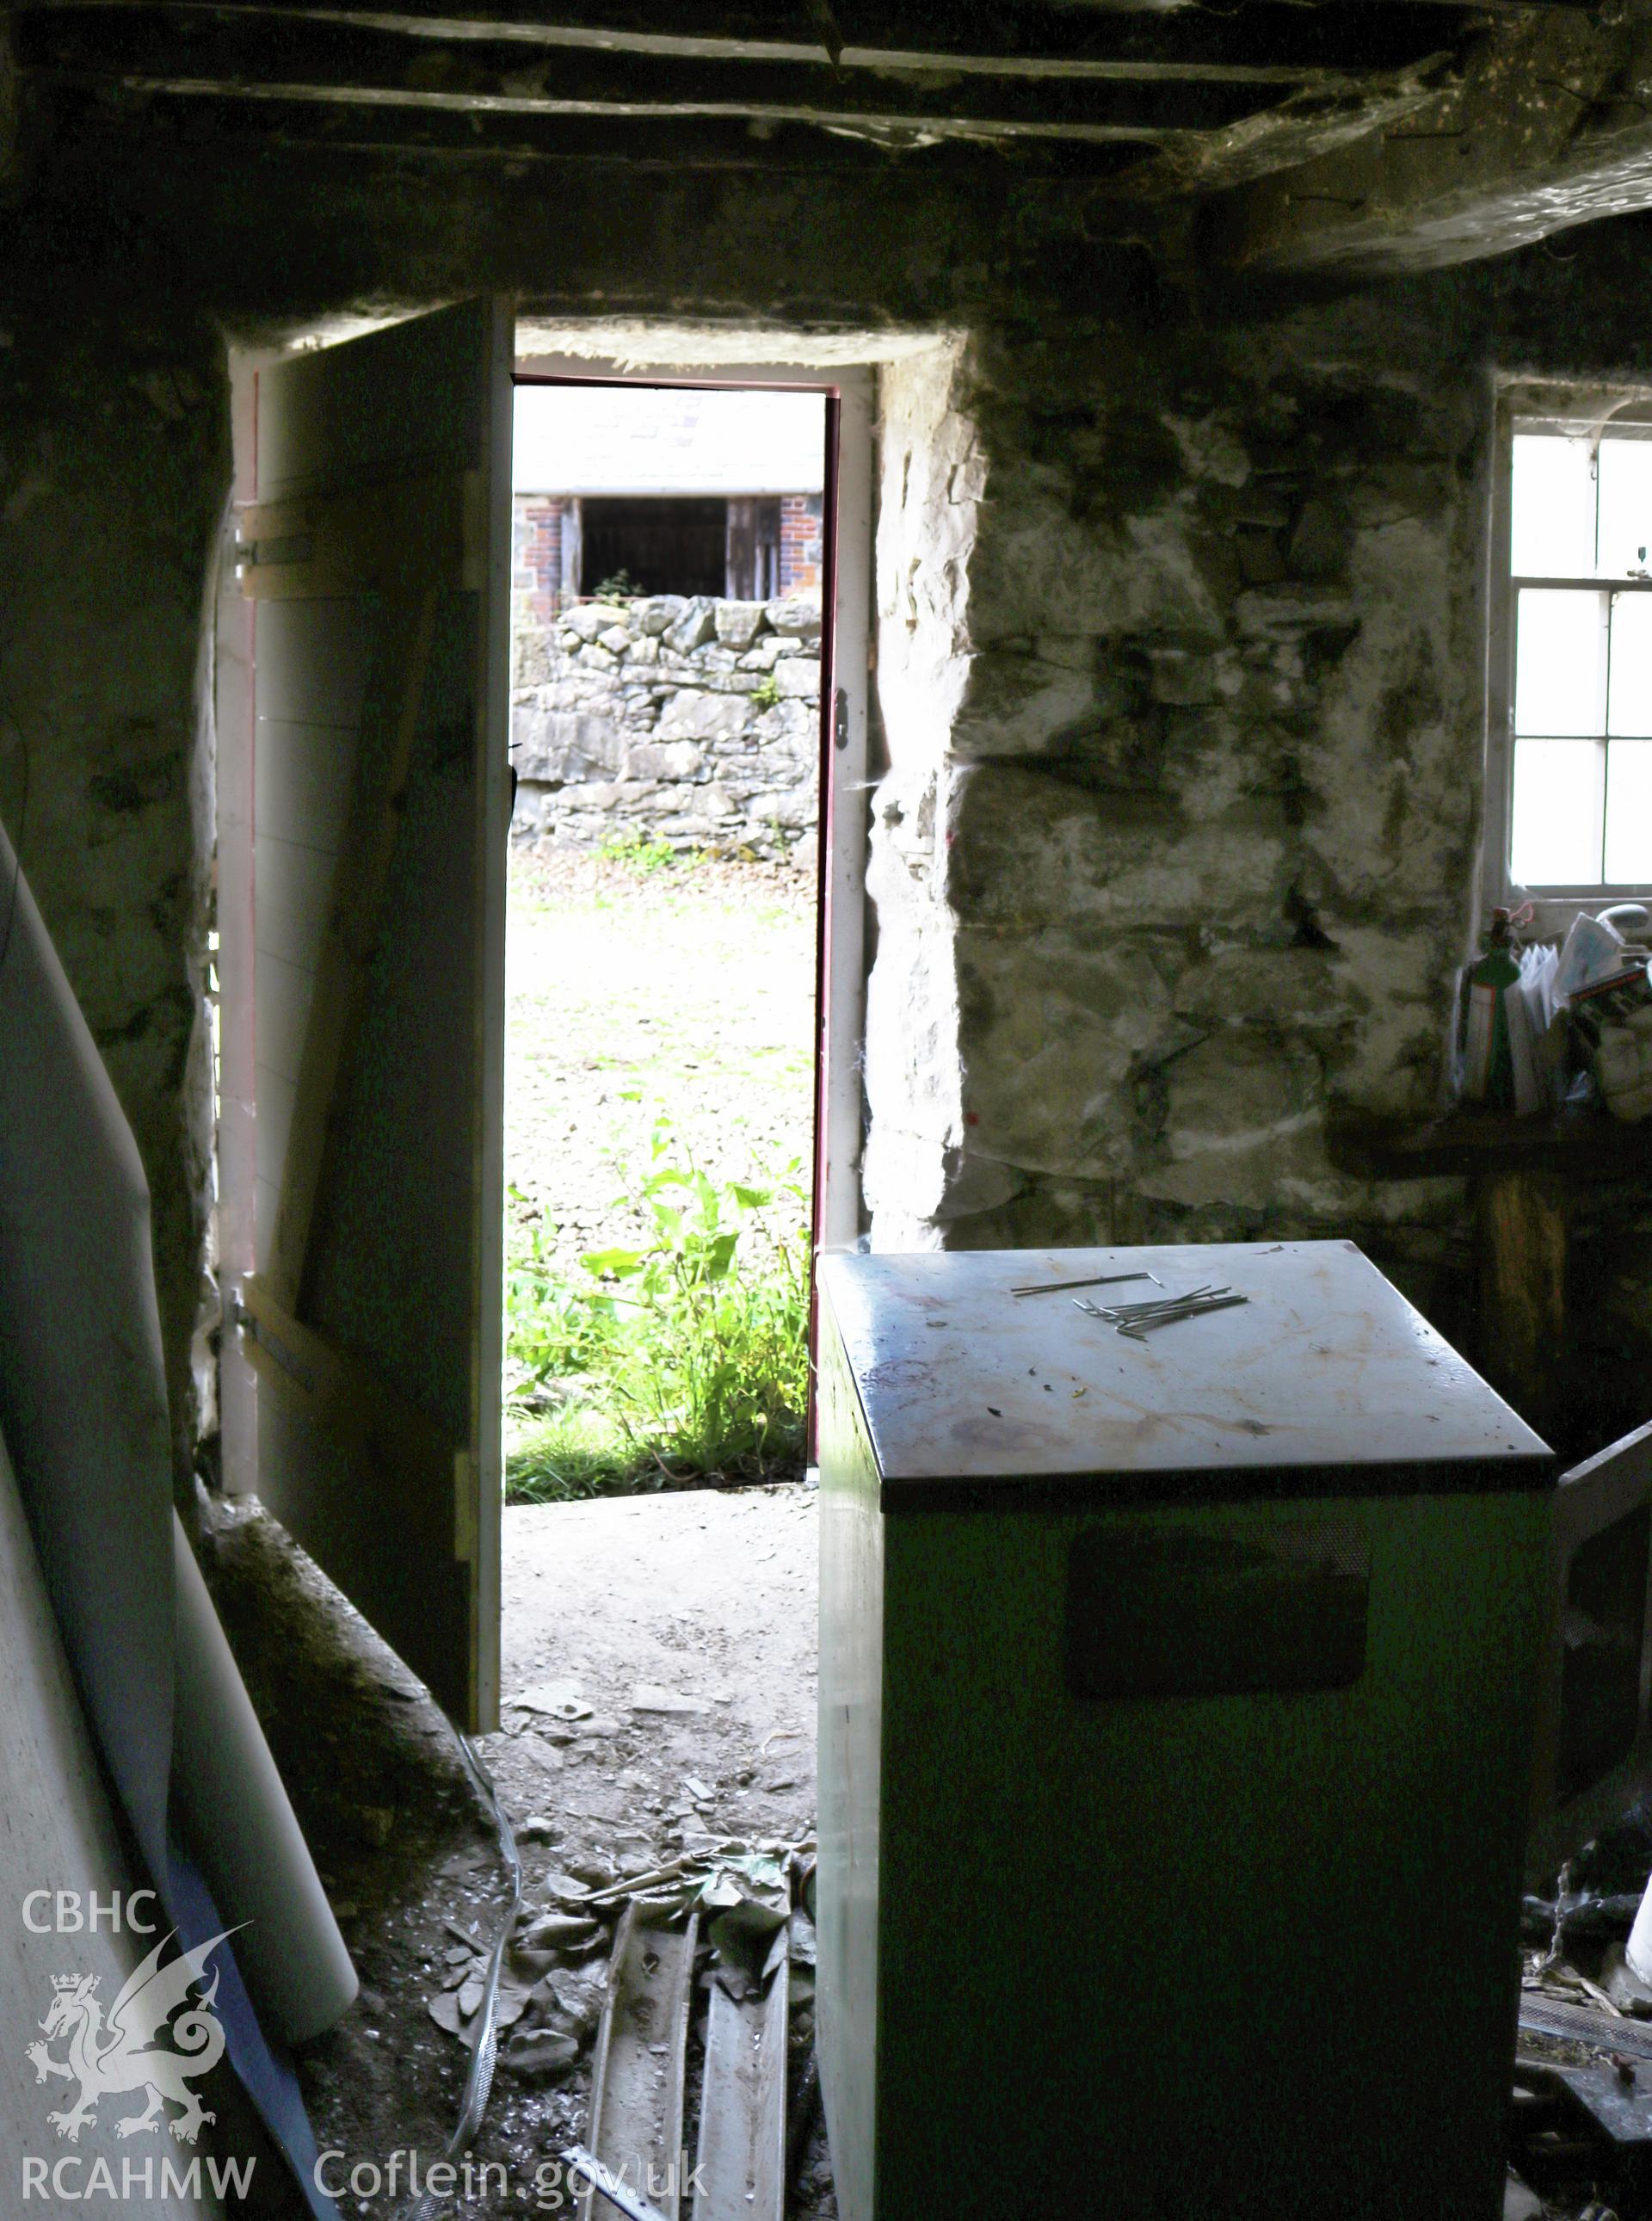 Photograph showing internal view of unidentified farm building, at Maes yr Hendre, taken by Dr Marian Gwyn, 6th July 2016. (Original Reference no. 0093)